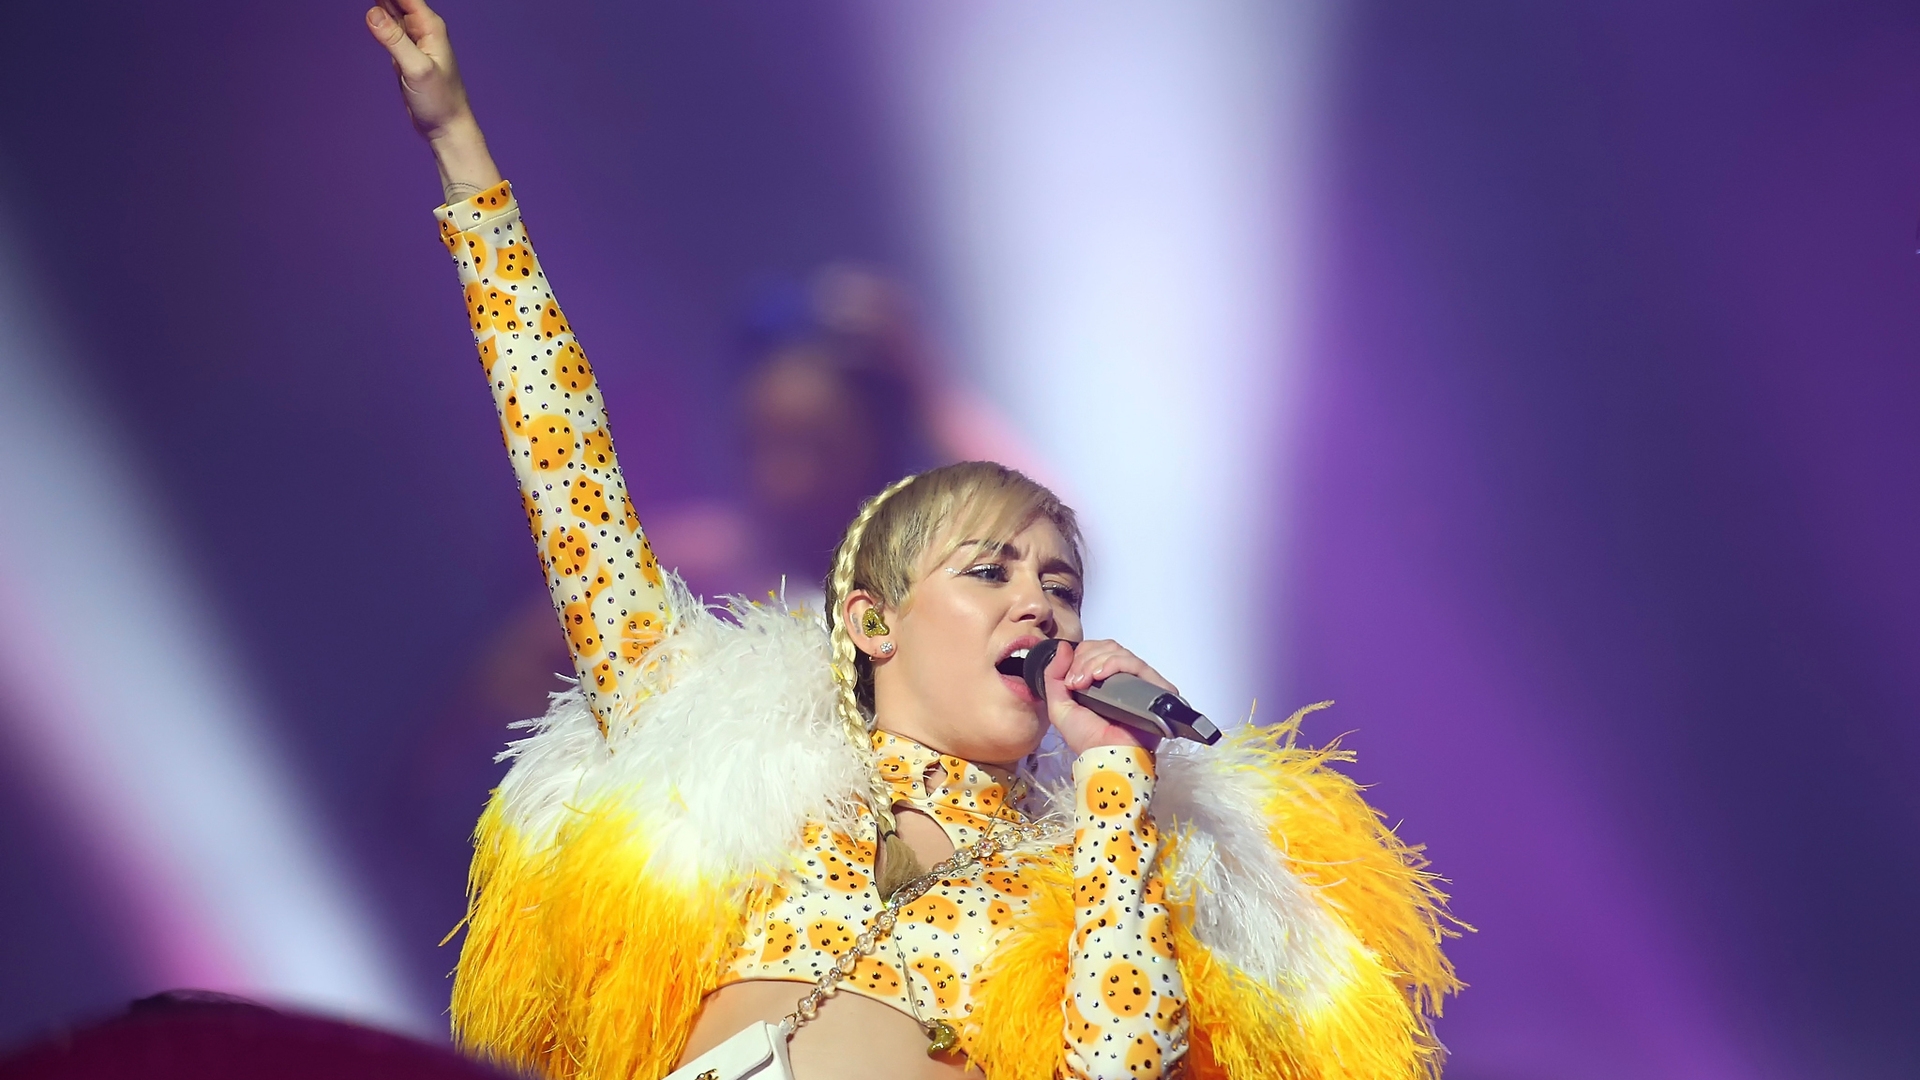 Miley Cyrus Live Performance for 1920 x 1080 HDTV 1080p resolution